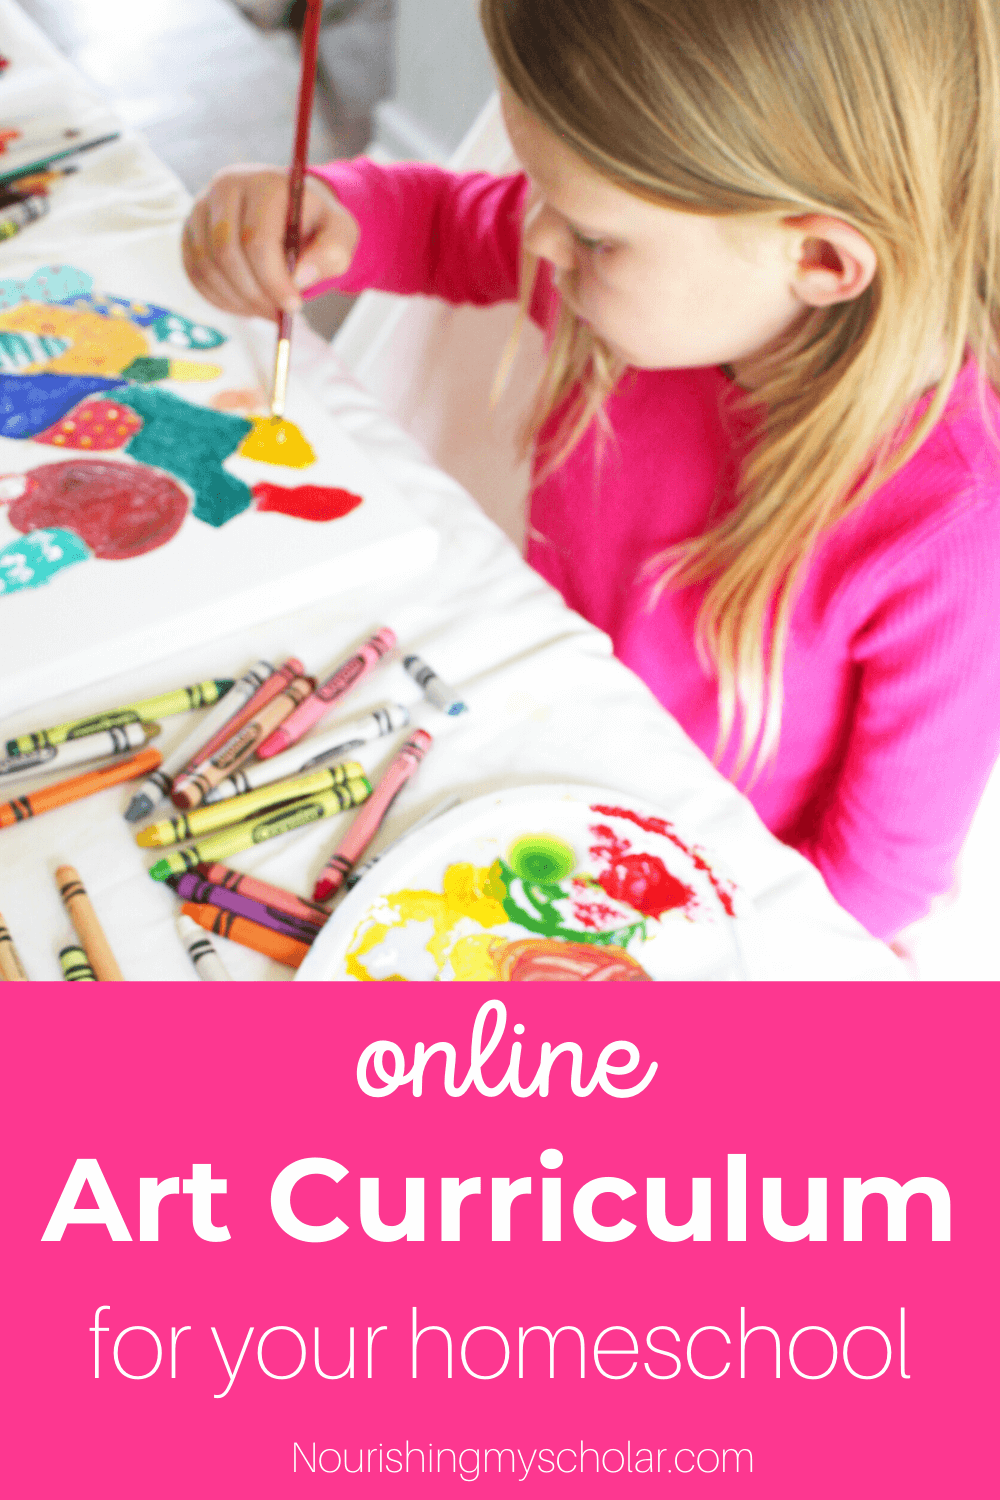 Online Art Curriculum for Your Homeschool: An Online Art Curriculum is a fabulous way to add the beauty of art class to your homeschool. This award-winning program will help your child learn the fundamentals of art in short easy lessons. #homeschool #homeschooling #homeschoolart #art #artcurriculum #onlineart #onlineartcurriculum #elementaryart